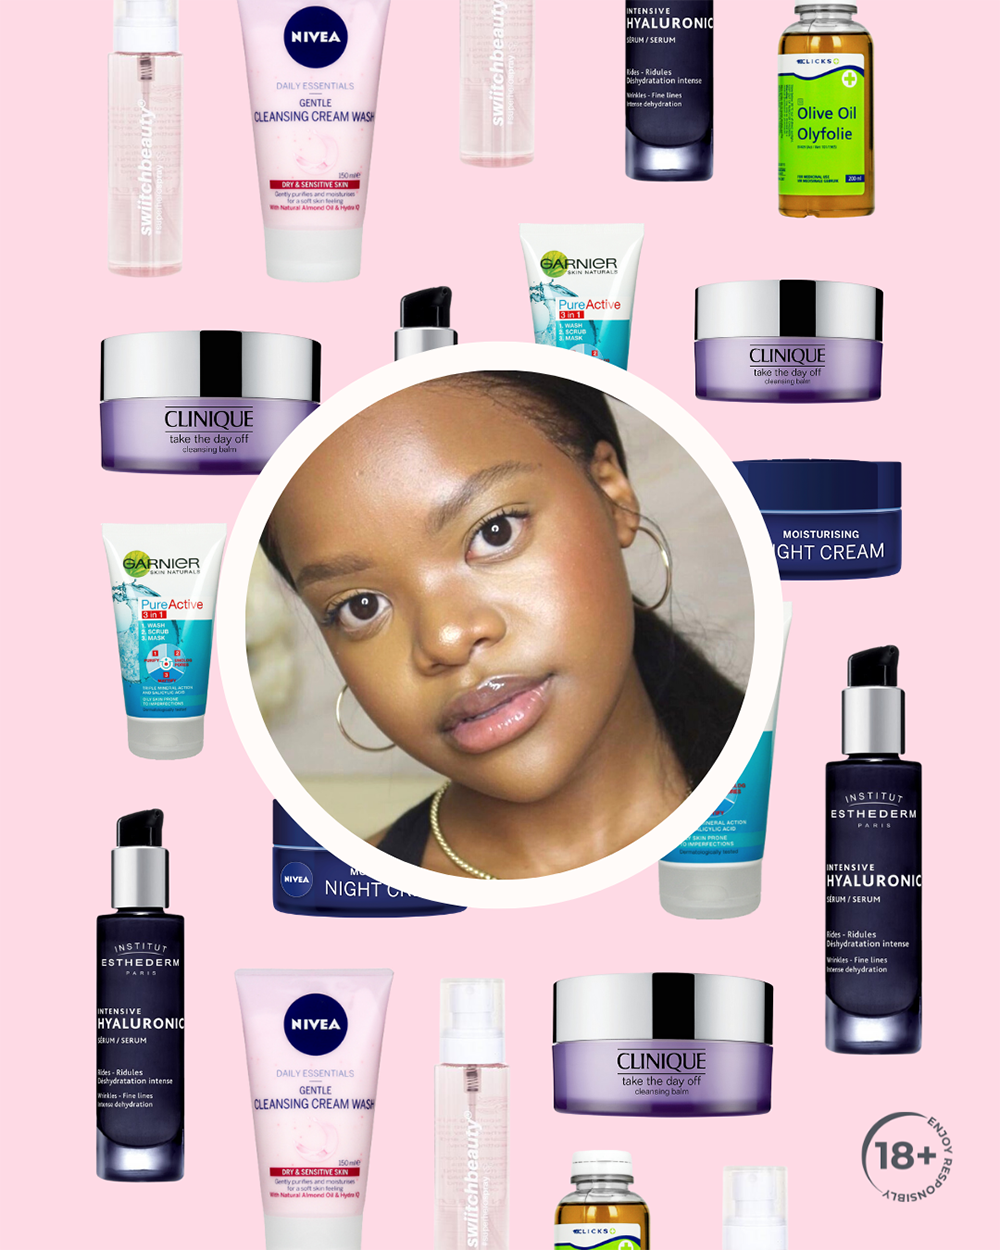 khay republik, south african influencer, beauty products, cosmetics, skincare, skinfluencer, skinfluencers, beauty influencers, beauty influencer, skincare routine, skincare routines, clean beauty, brutal fruit, the suite, the suite edit